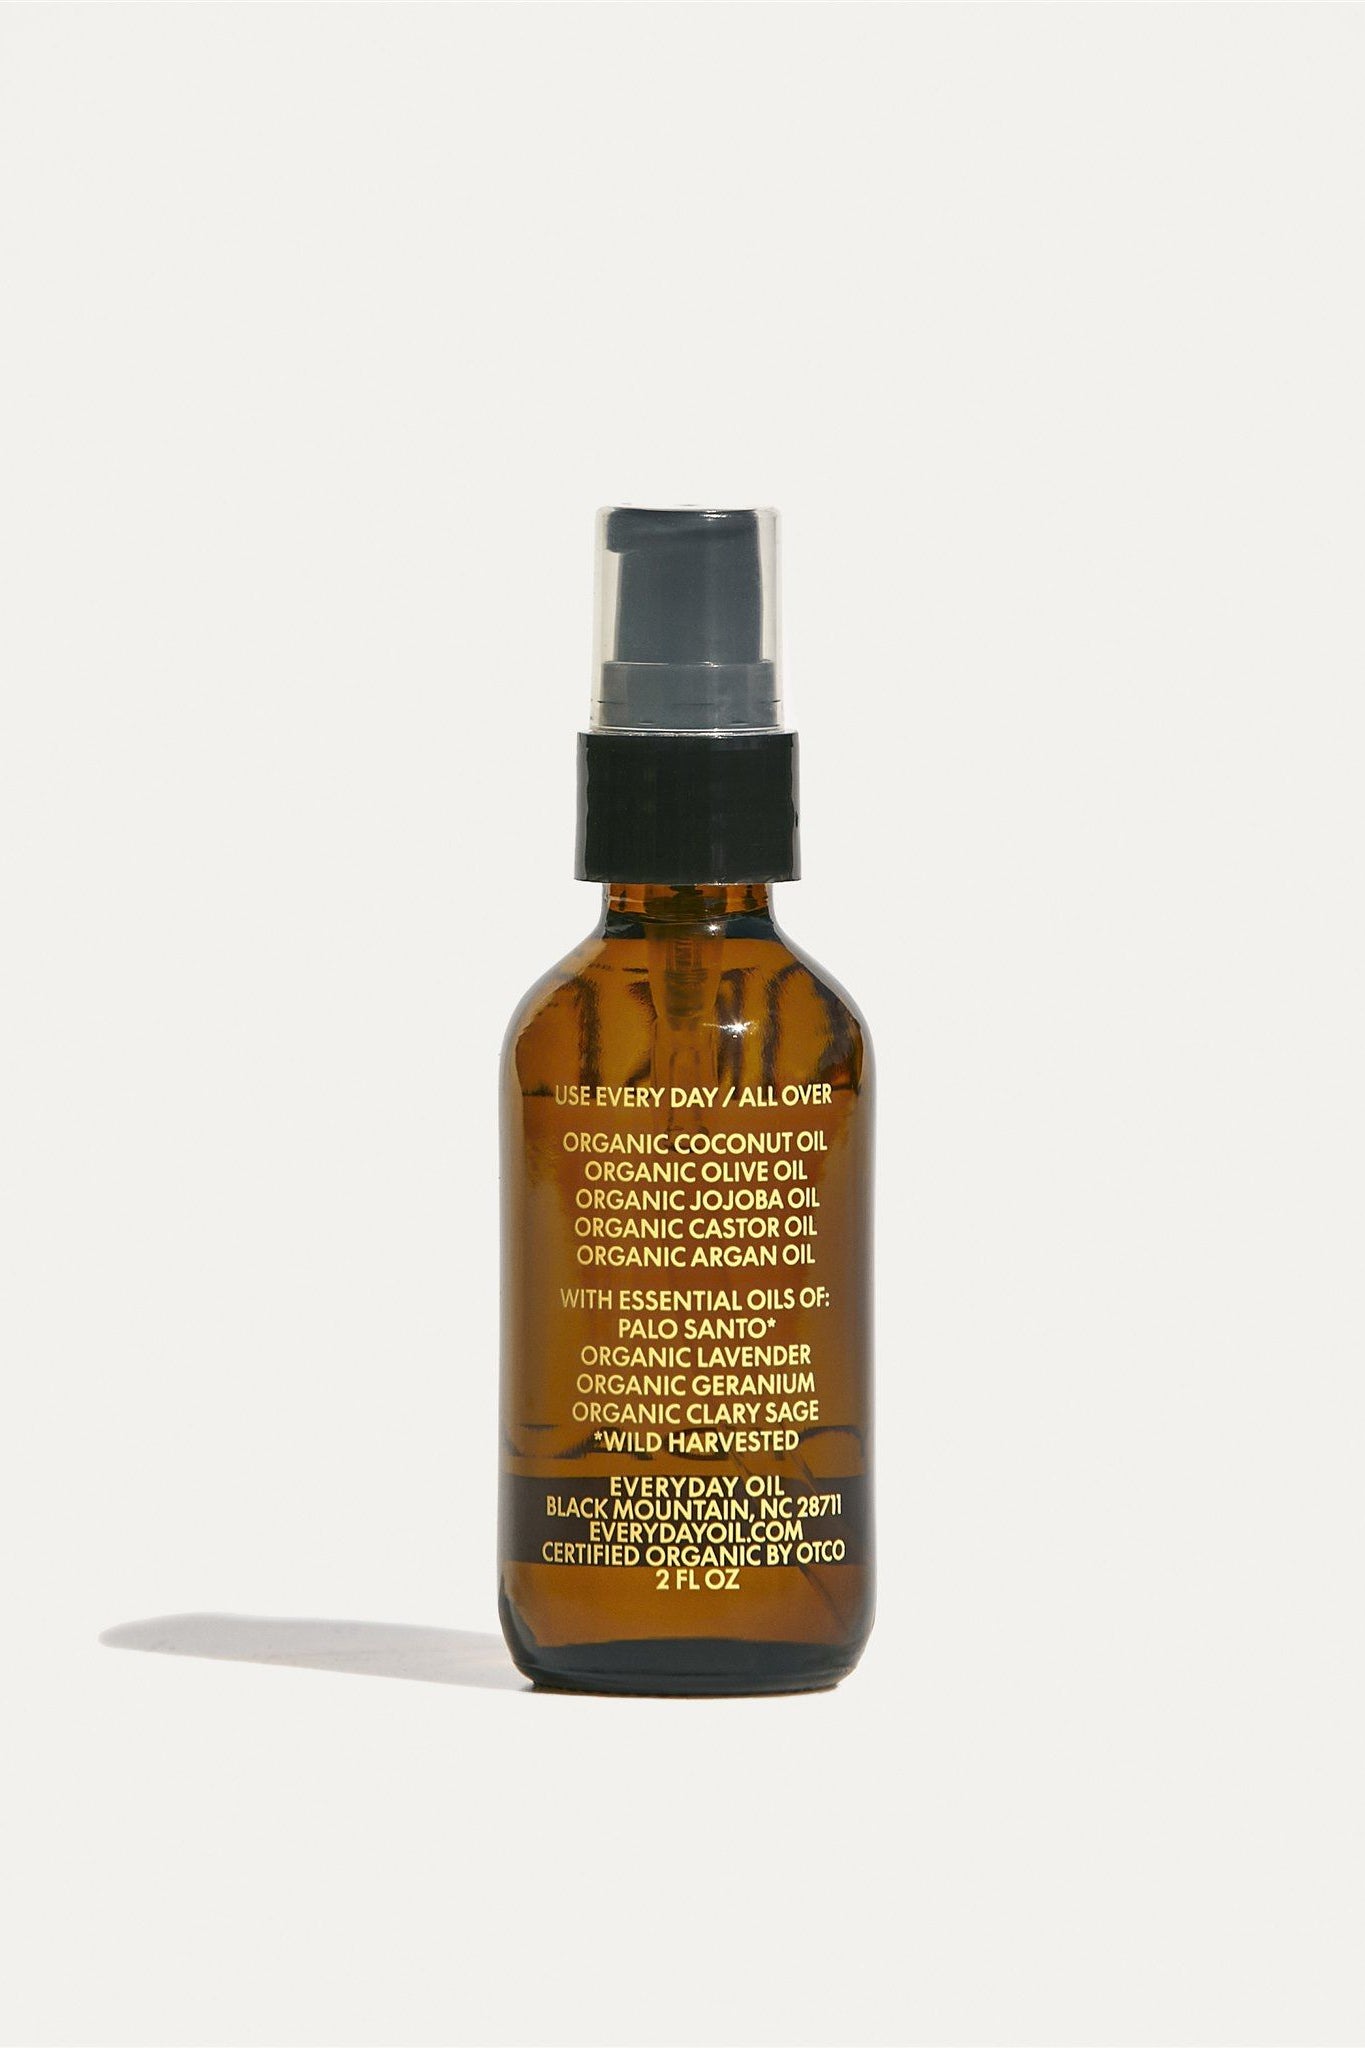 EVERYDAY OIL - 2 oz Bottle Mainstay Blend of Organic and Essential Oils for Hair, Skin, Body, and Face - Made in USA